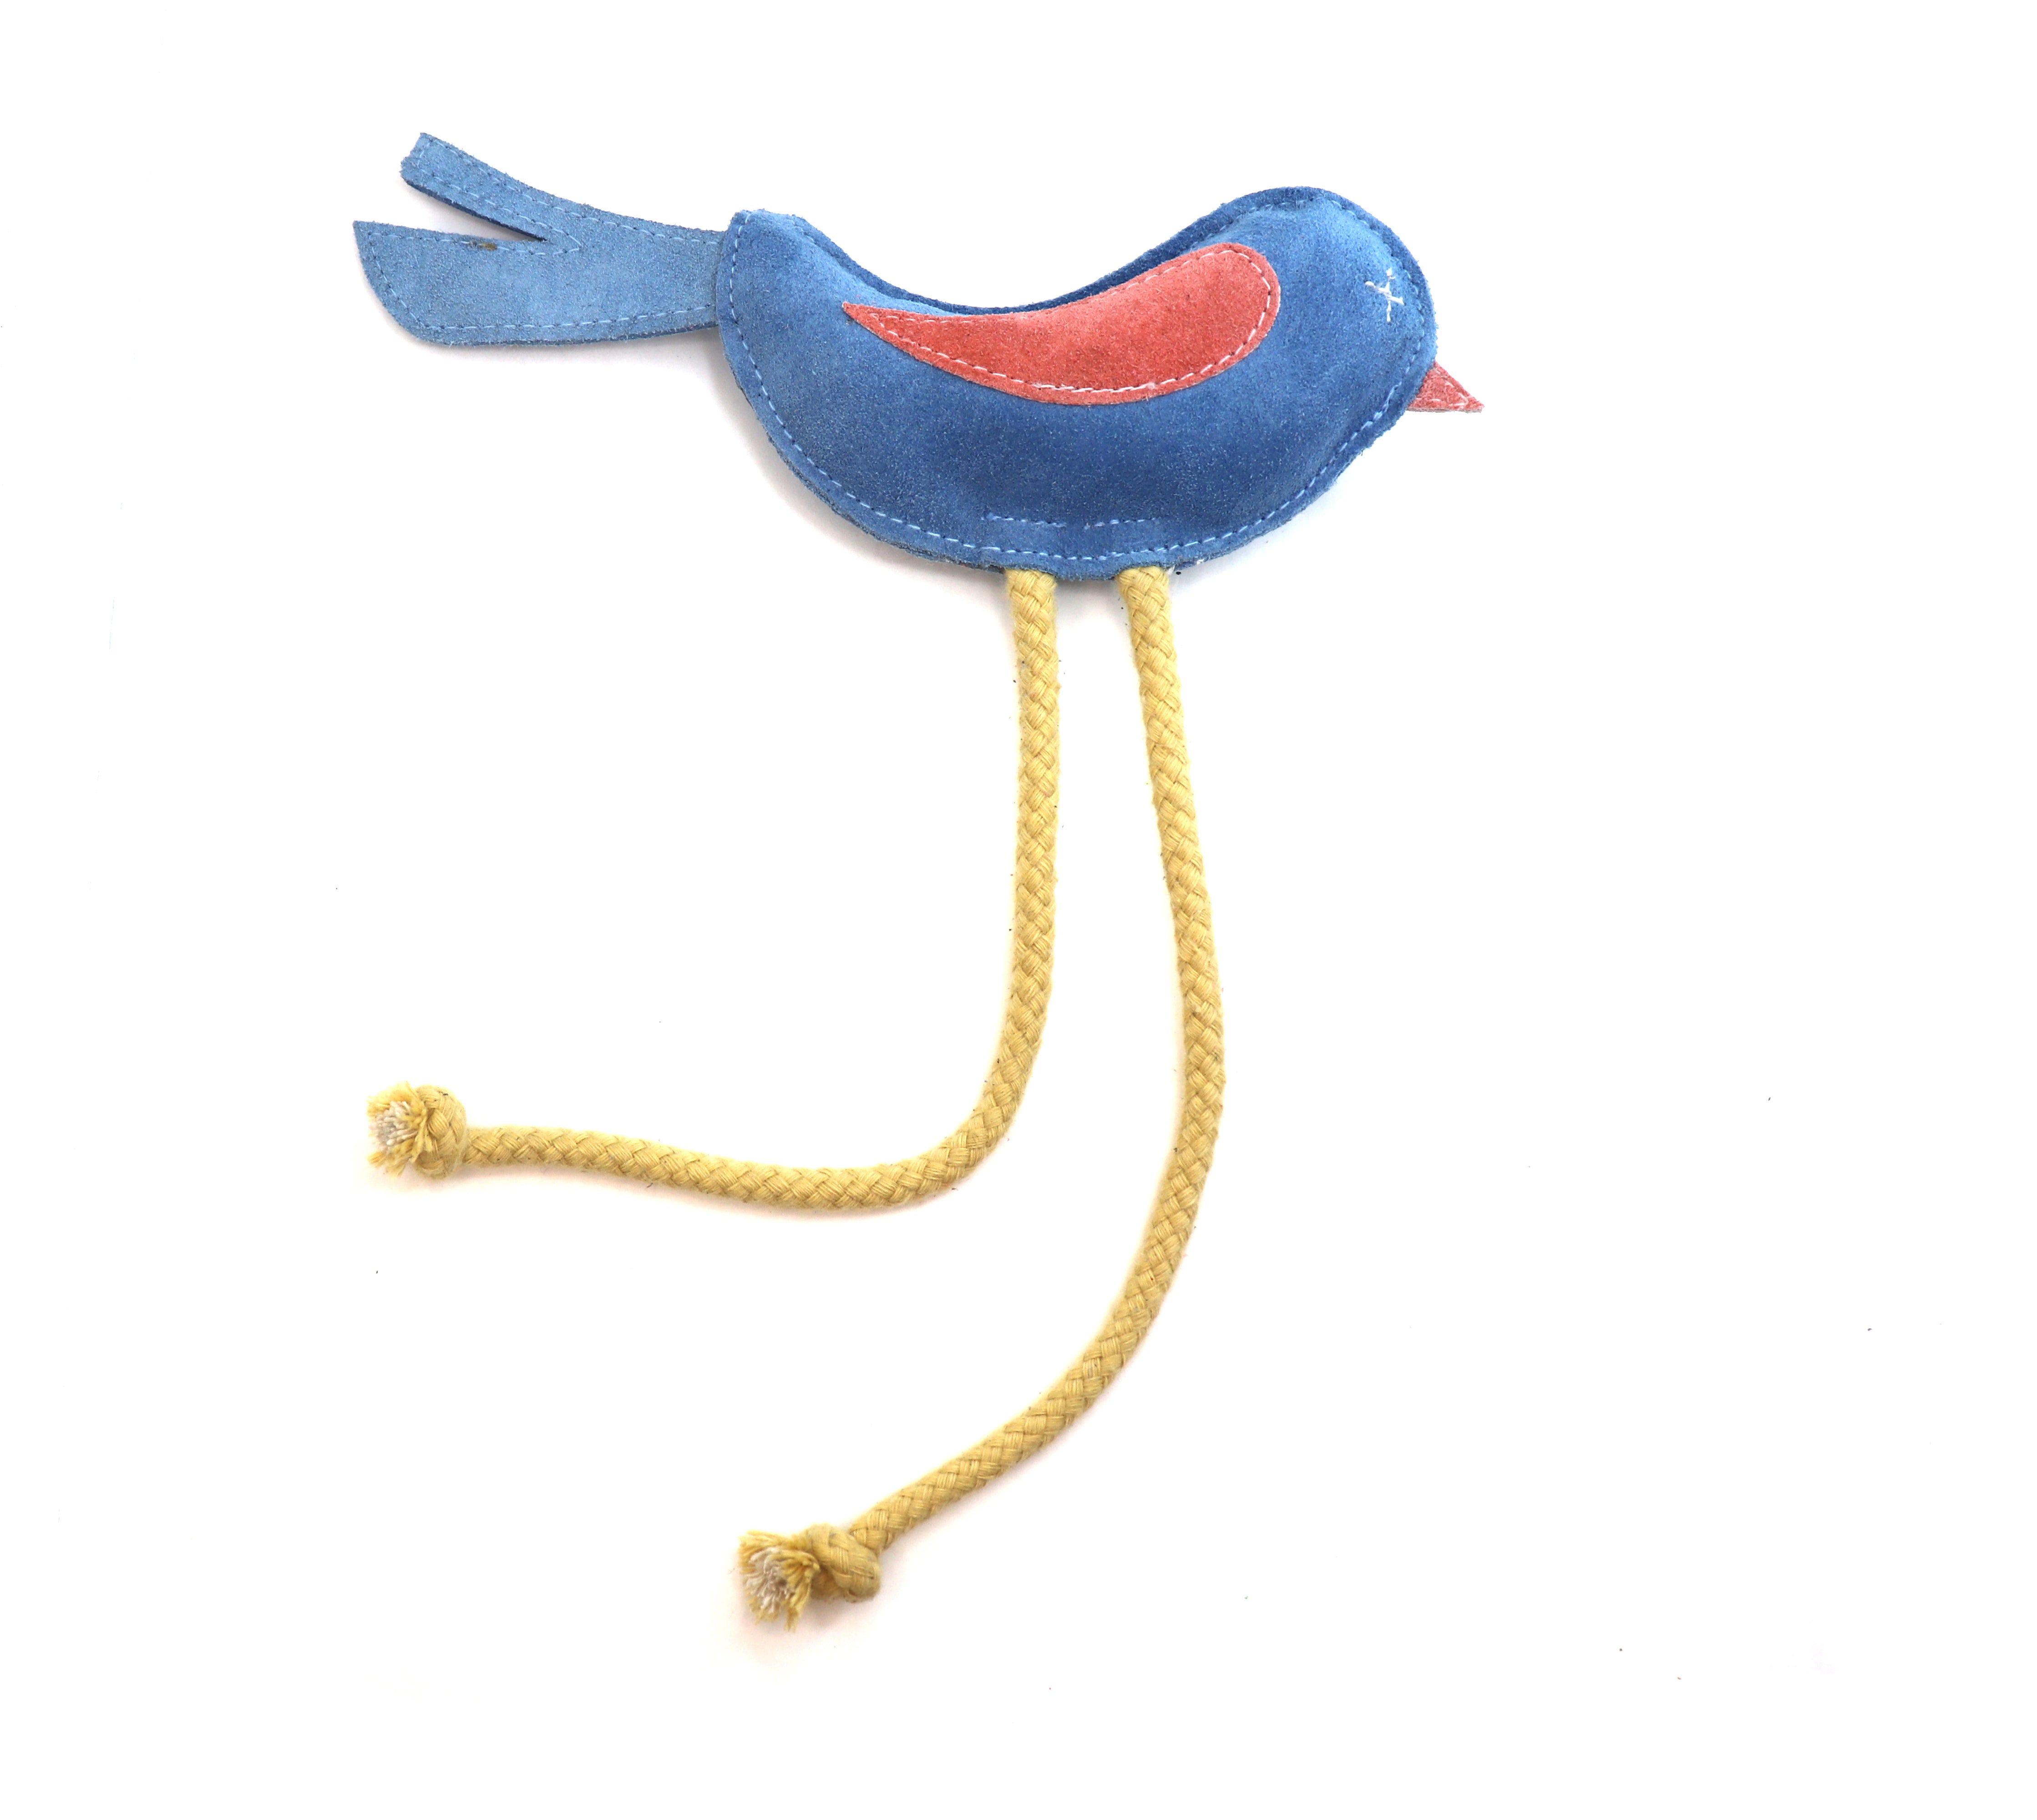 A colorful eco-friendly Birdy Toy in pink and blue made of fabric, primarily blue with a red belly and white polka dots, featuring a long yellow braided tail with knotted ends, isolated on a white background by Georgie Paws.